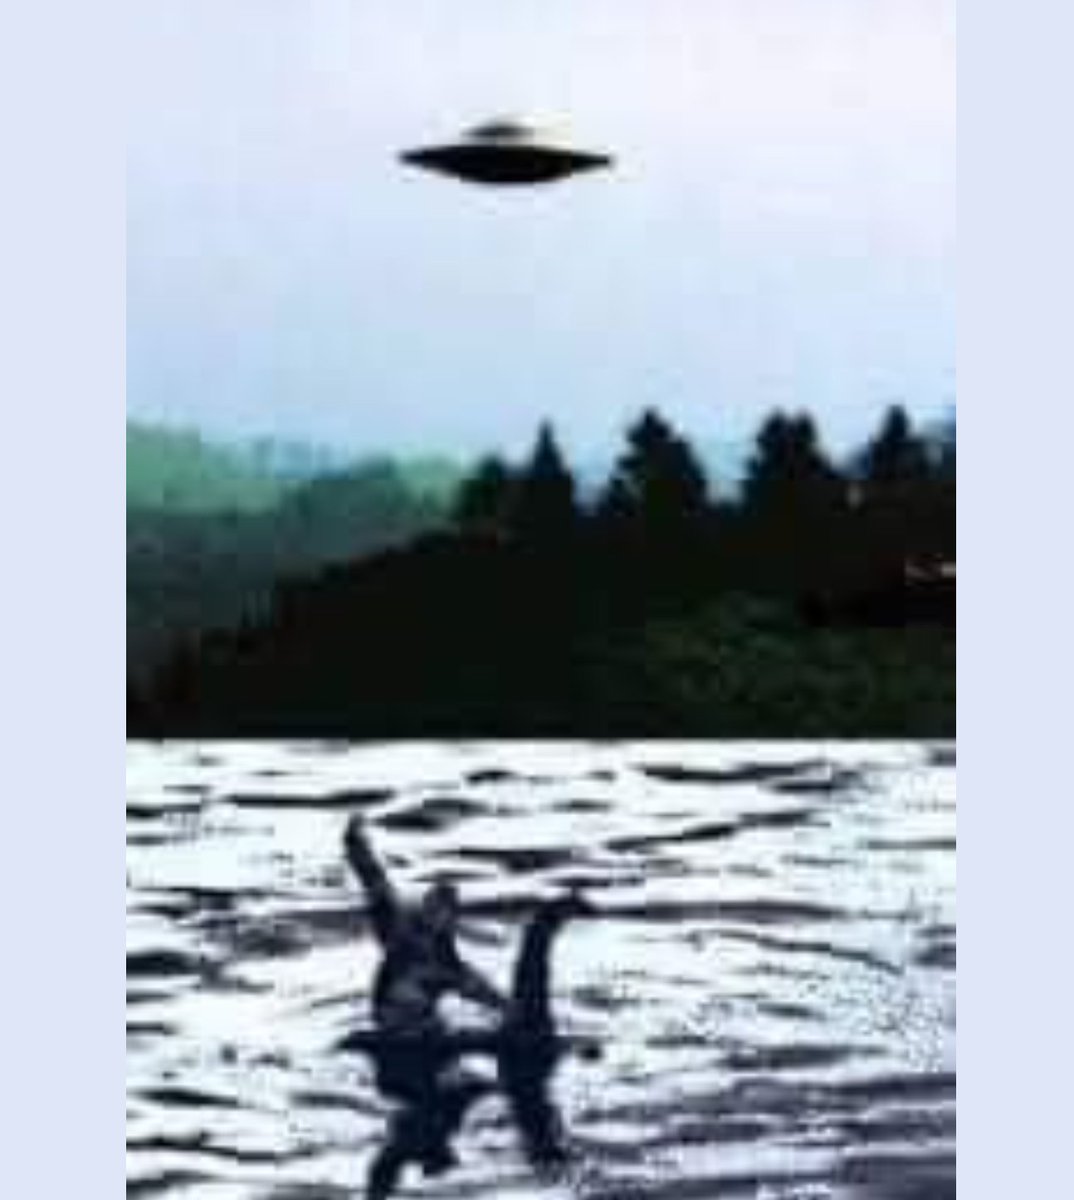 A rare blurred photo of a UFO hovering over Big Foot riding on the Loch Ness Monster. #enjoy #PoliticsToday